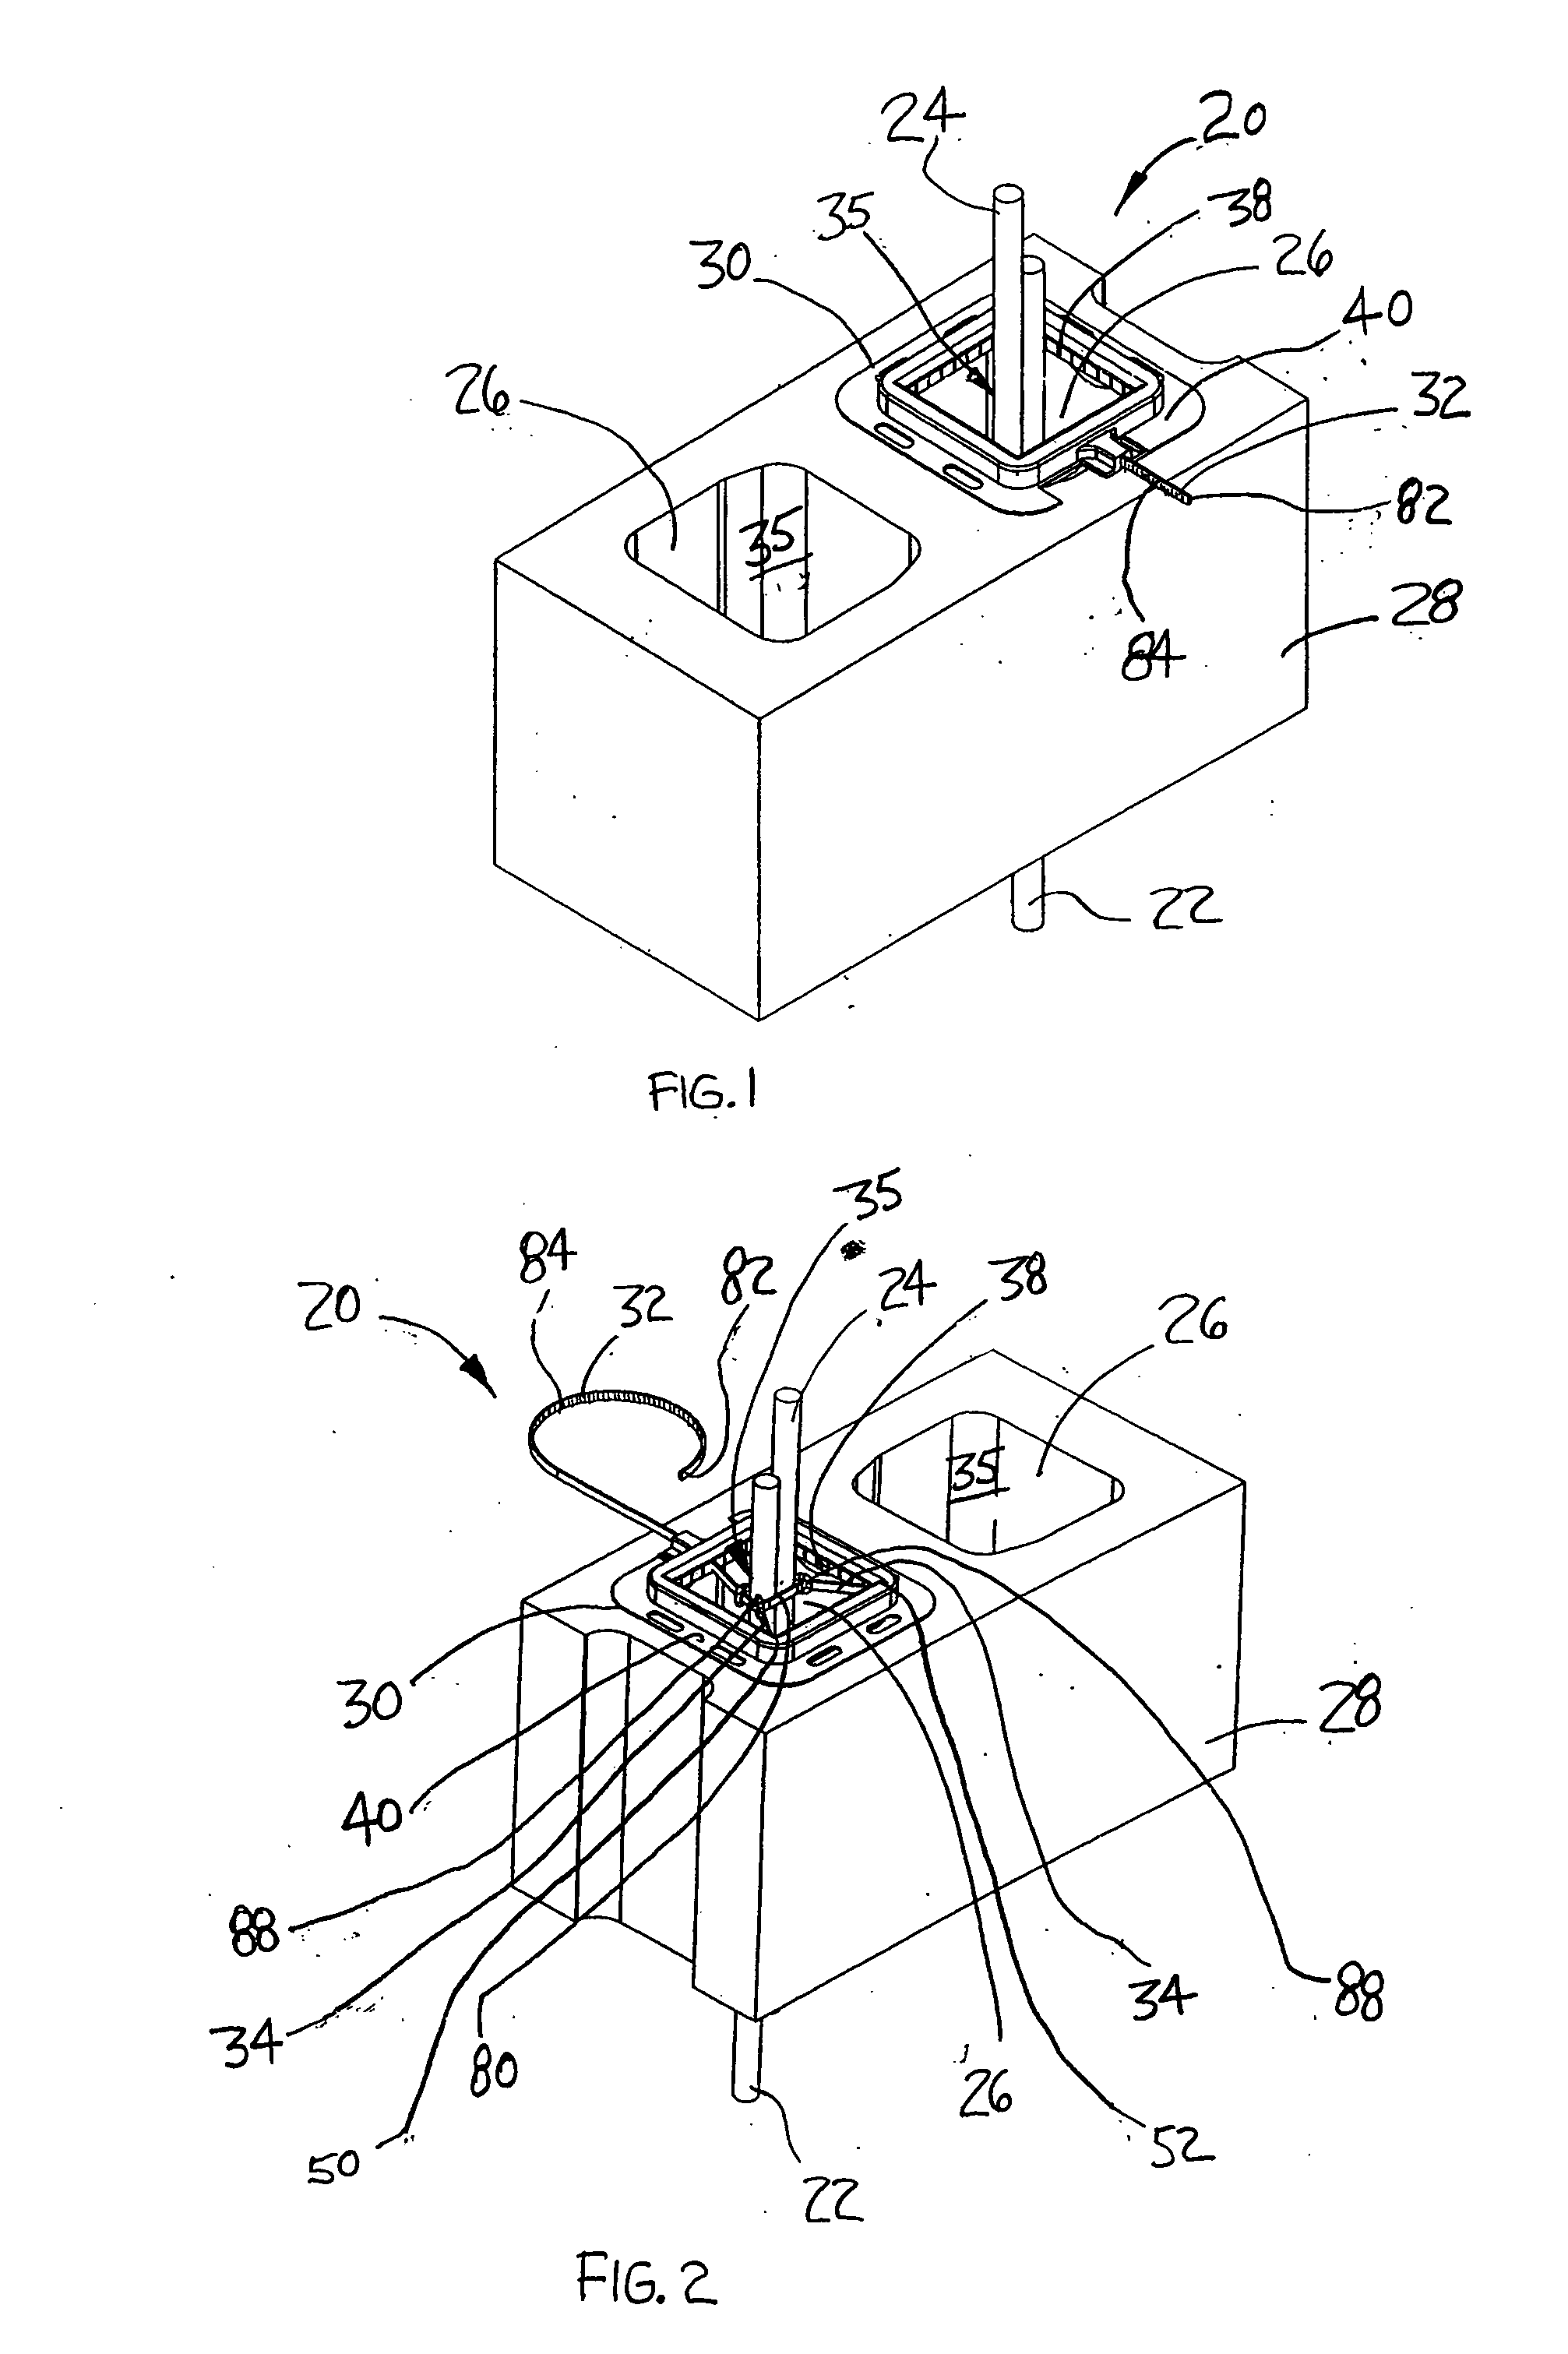 Device for tying and centering reinforcing bar